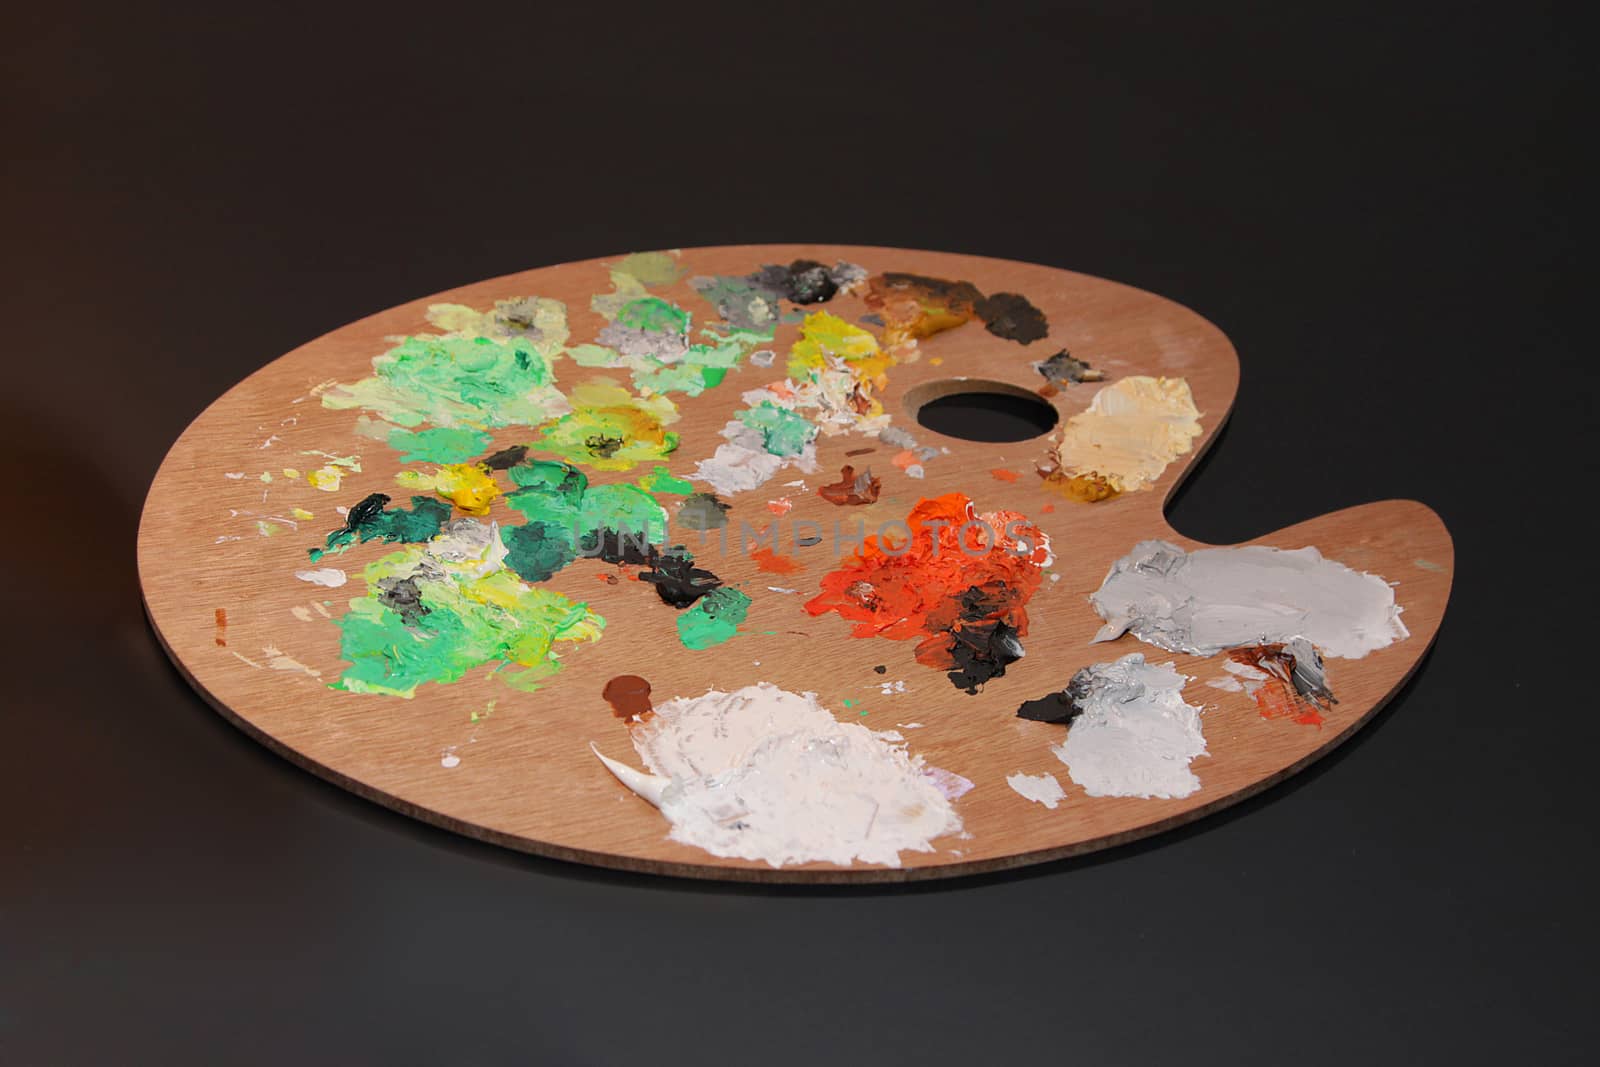 Artist's palette with colorful paints